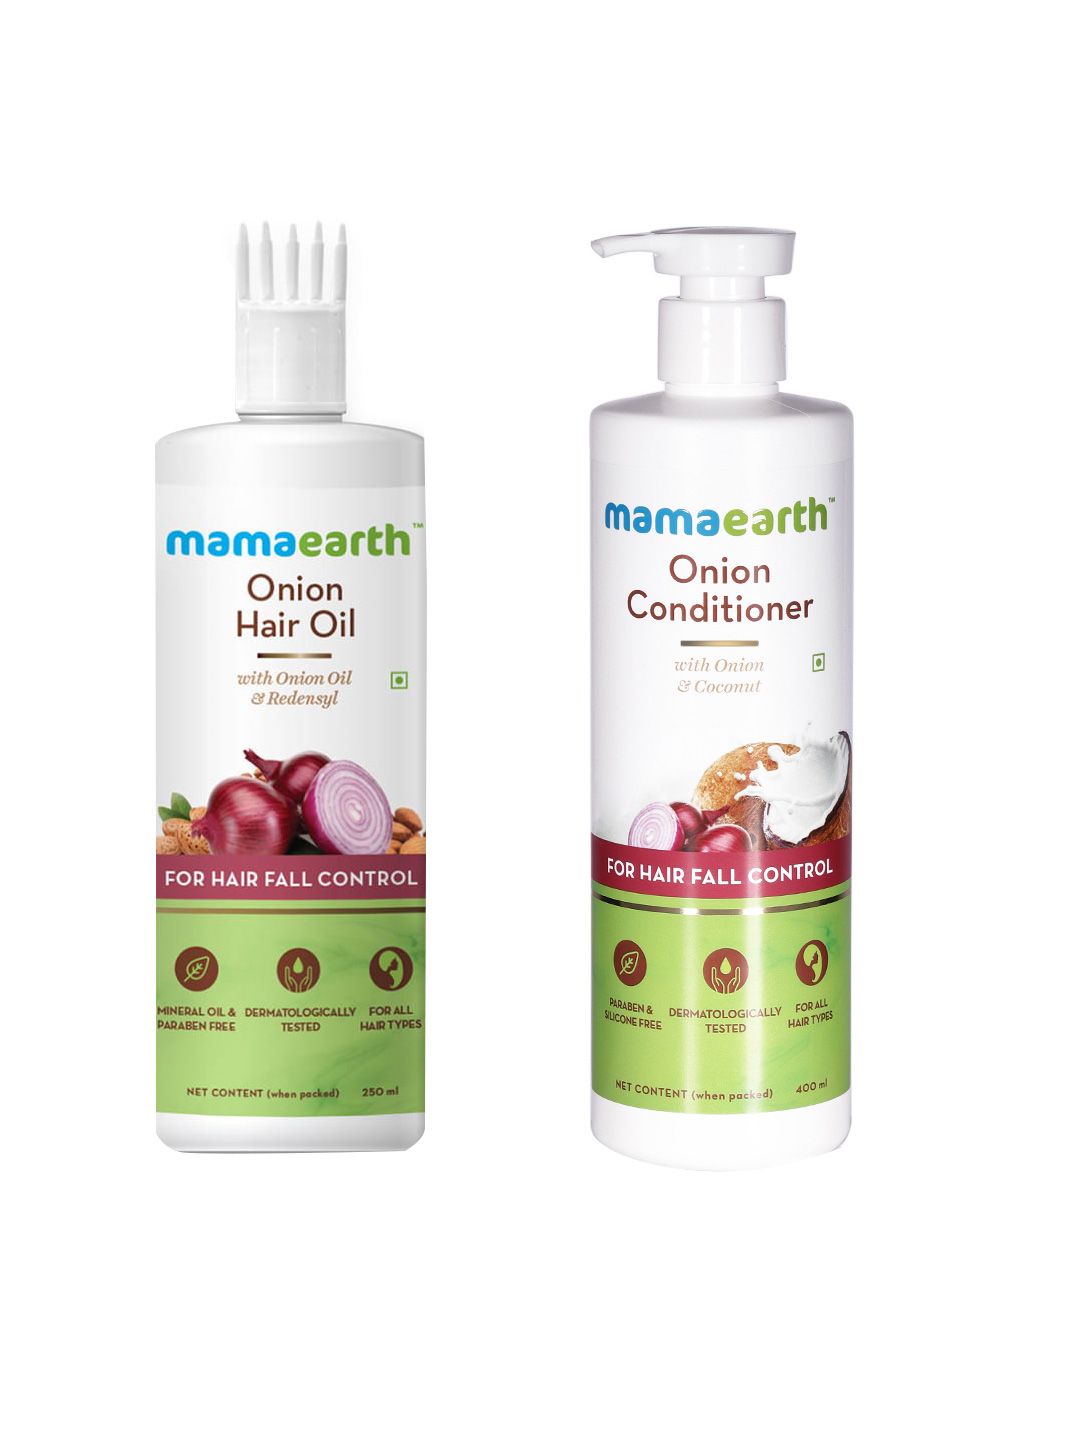 Mamaearth Sustainable Set of Onion & Cocunut Conditioner & Onion Hair Oil Price in India